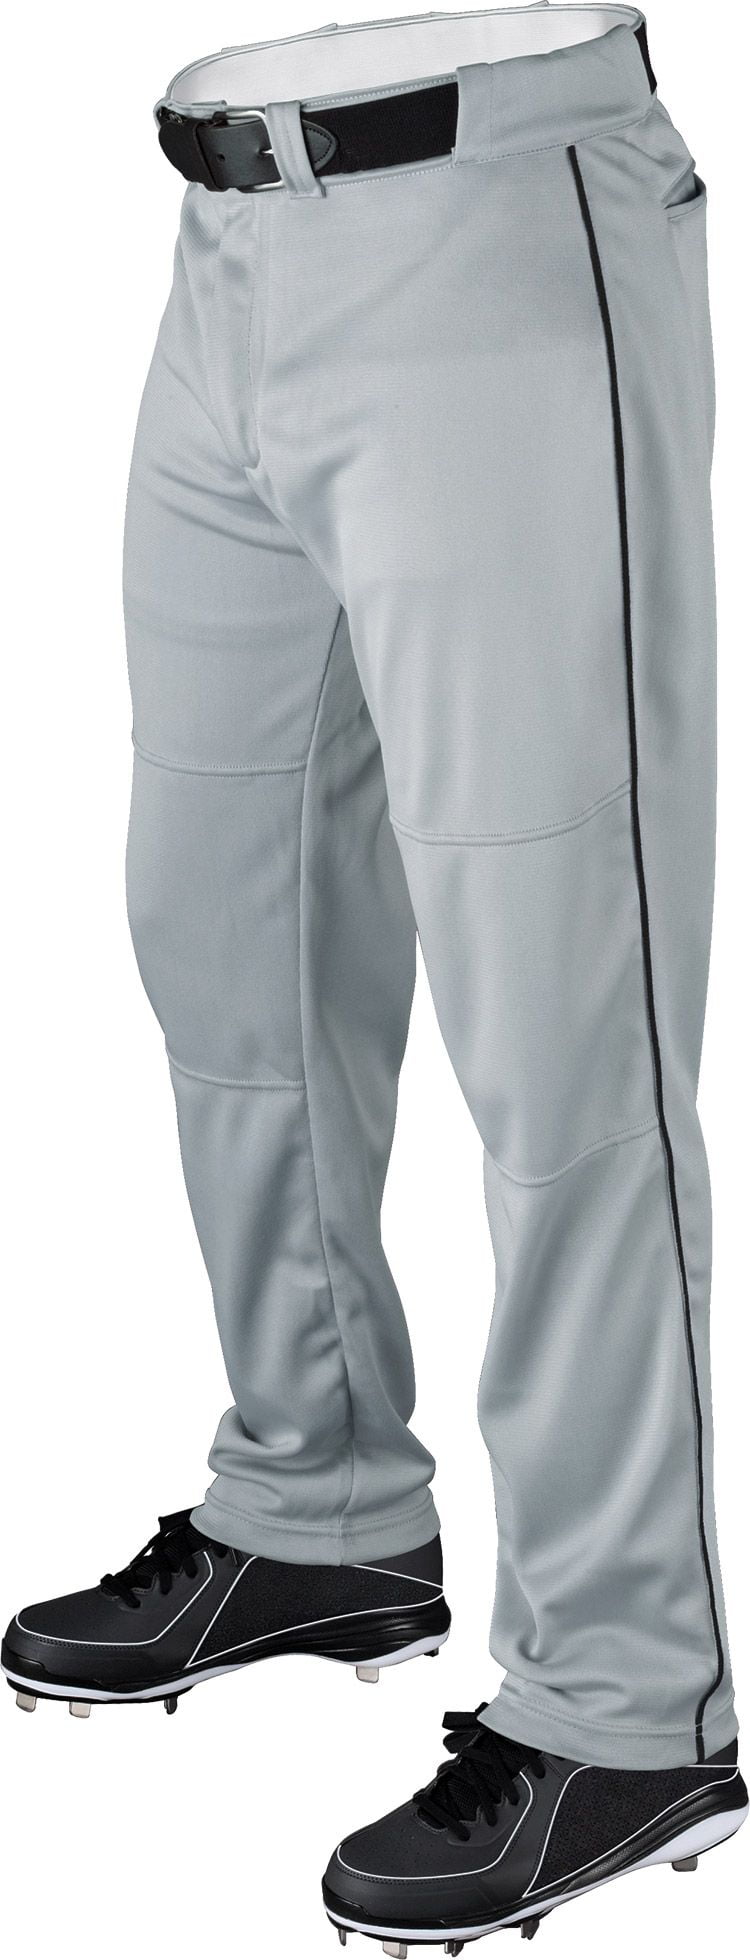 NEW Wilson Men's Relaxed Fit Gray Baseball Softball Pants Size Small NWT 